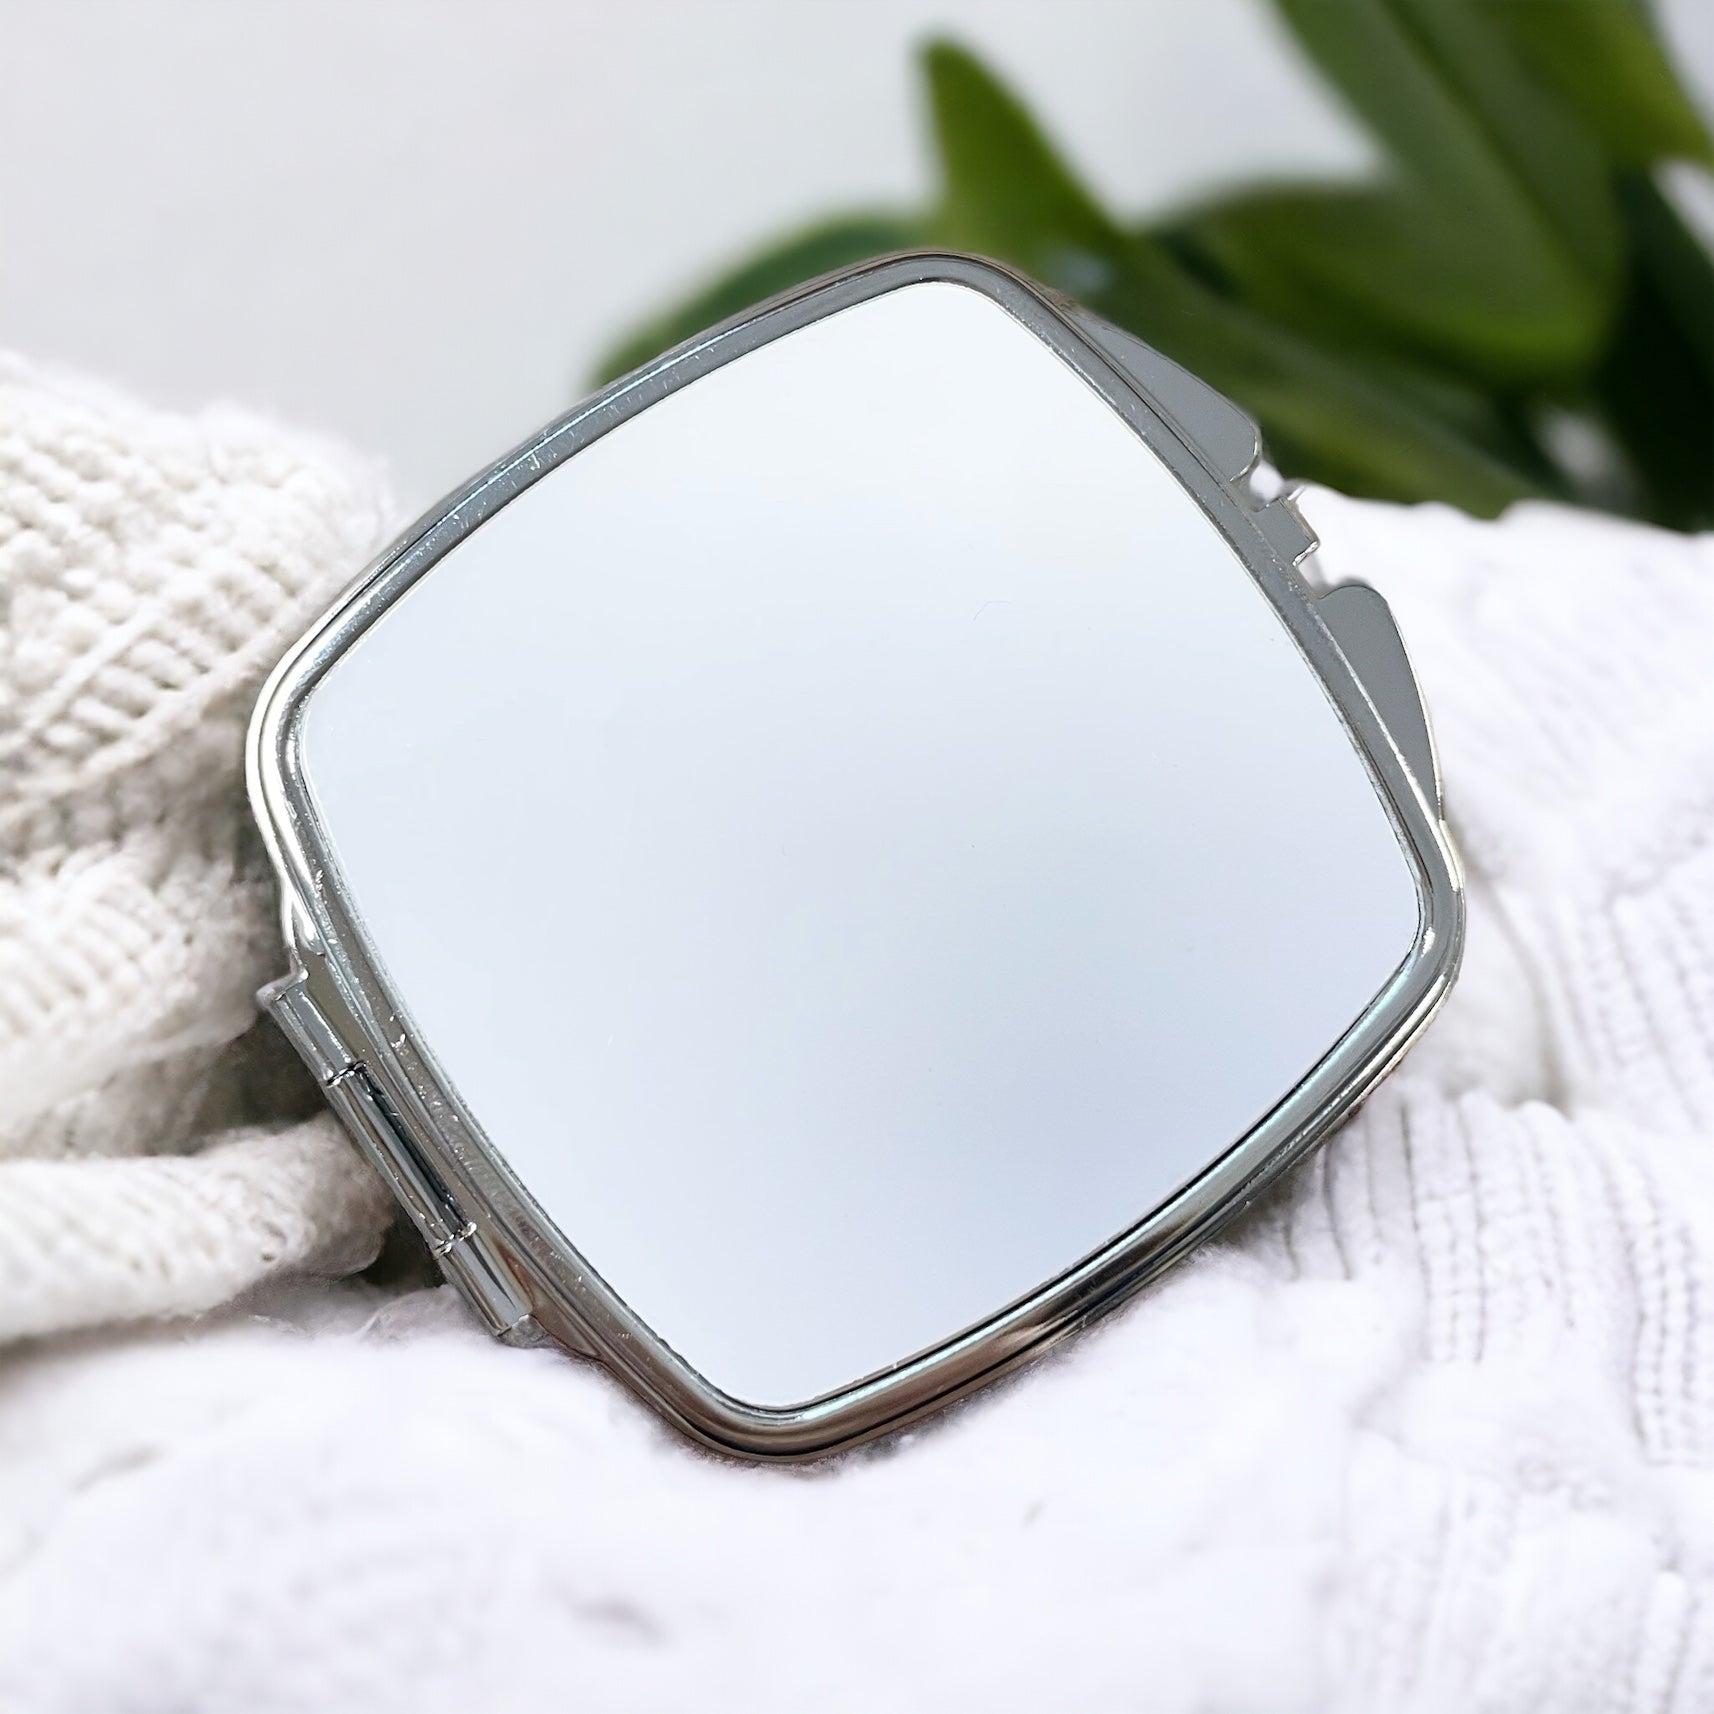 COMPACT MIRROR (SUITABLE FOR SUBLIMATION)